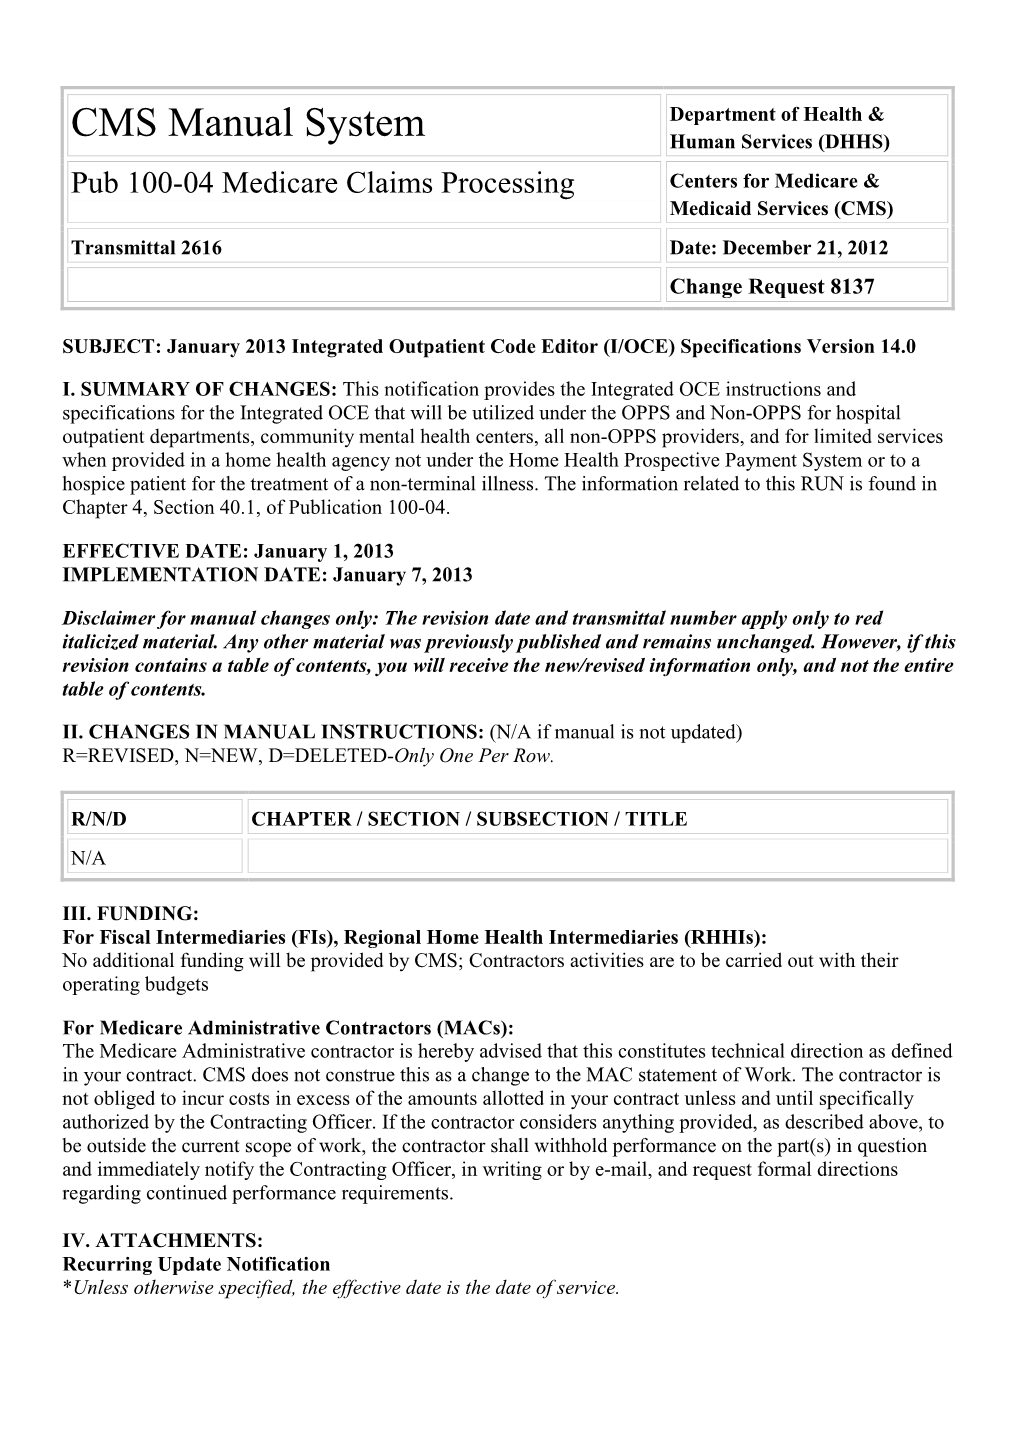 Pub 100-04 Medicare Claims Processing Centers for Medicare & Medicaid Services (CMS) Transmittal 2616 Date: December 21, 2012 Change Request 8137